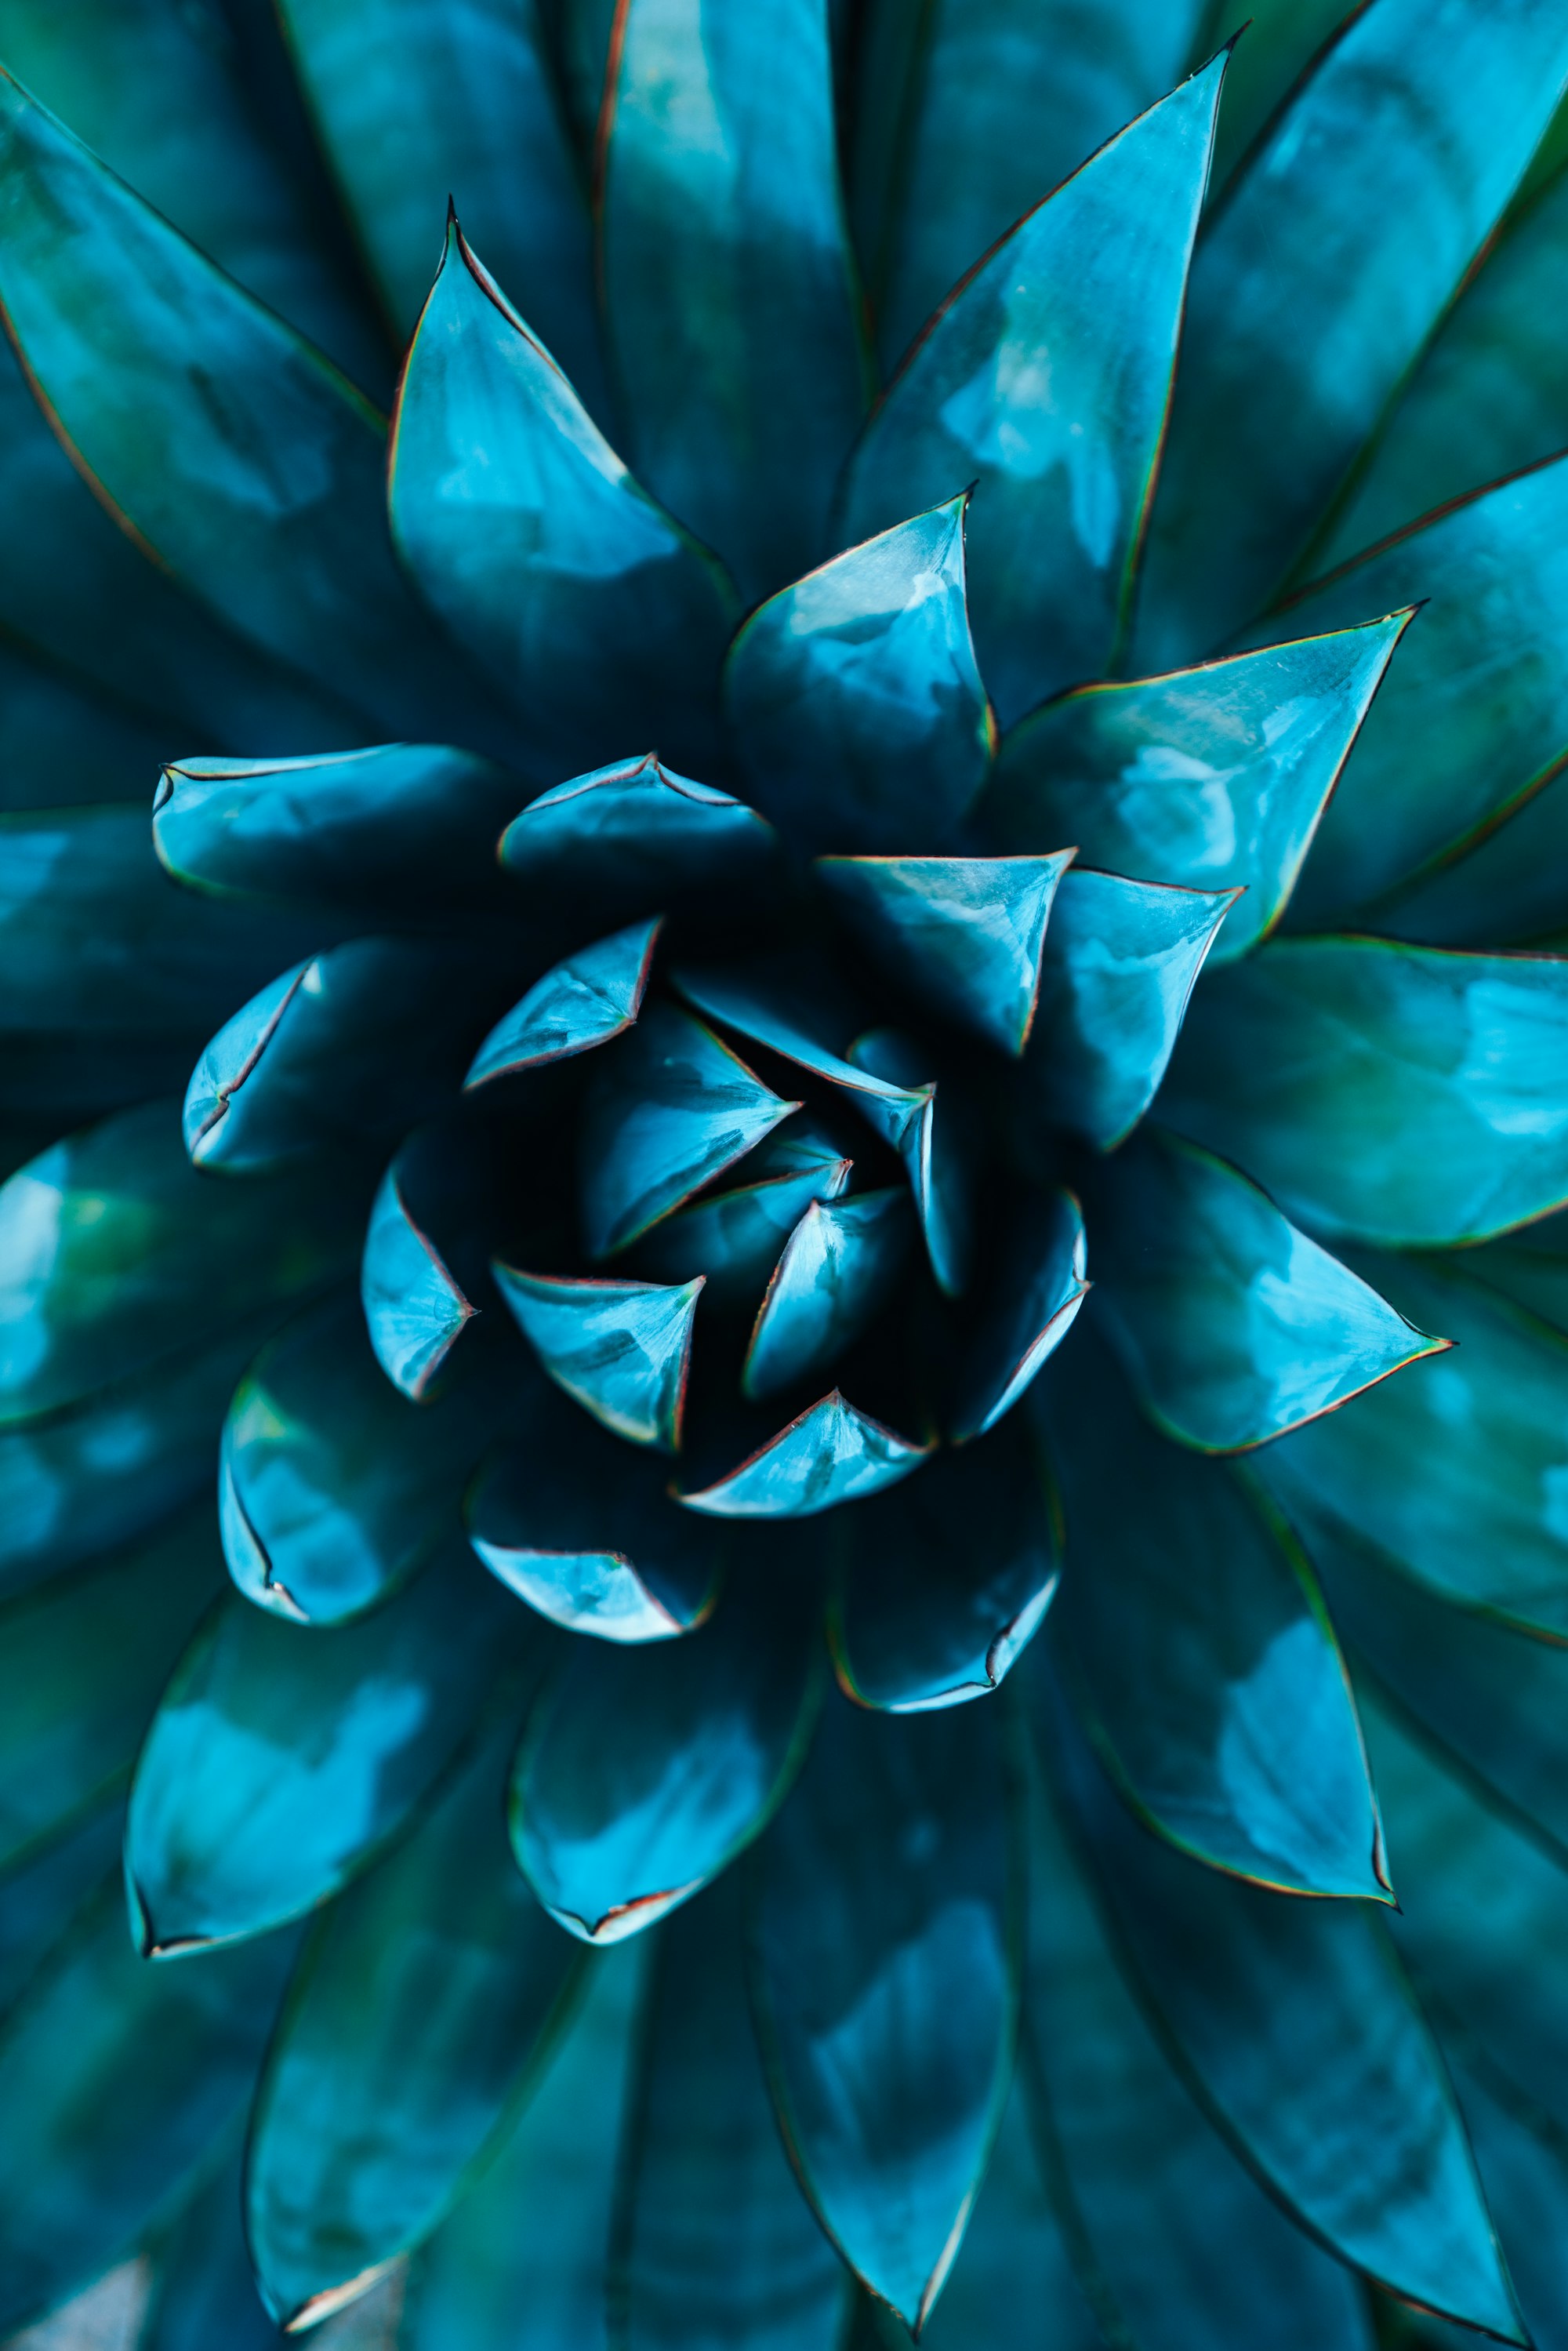 Spiraling teal leaves at the center of a succulent cactus plant.